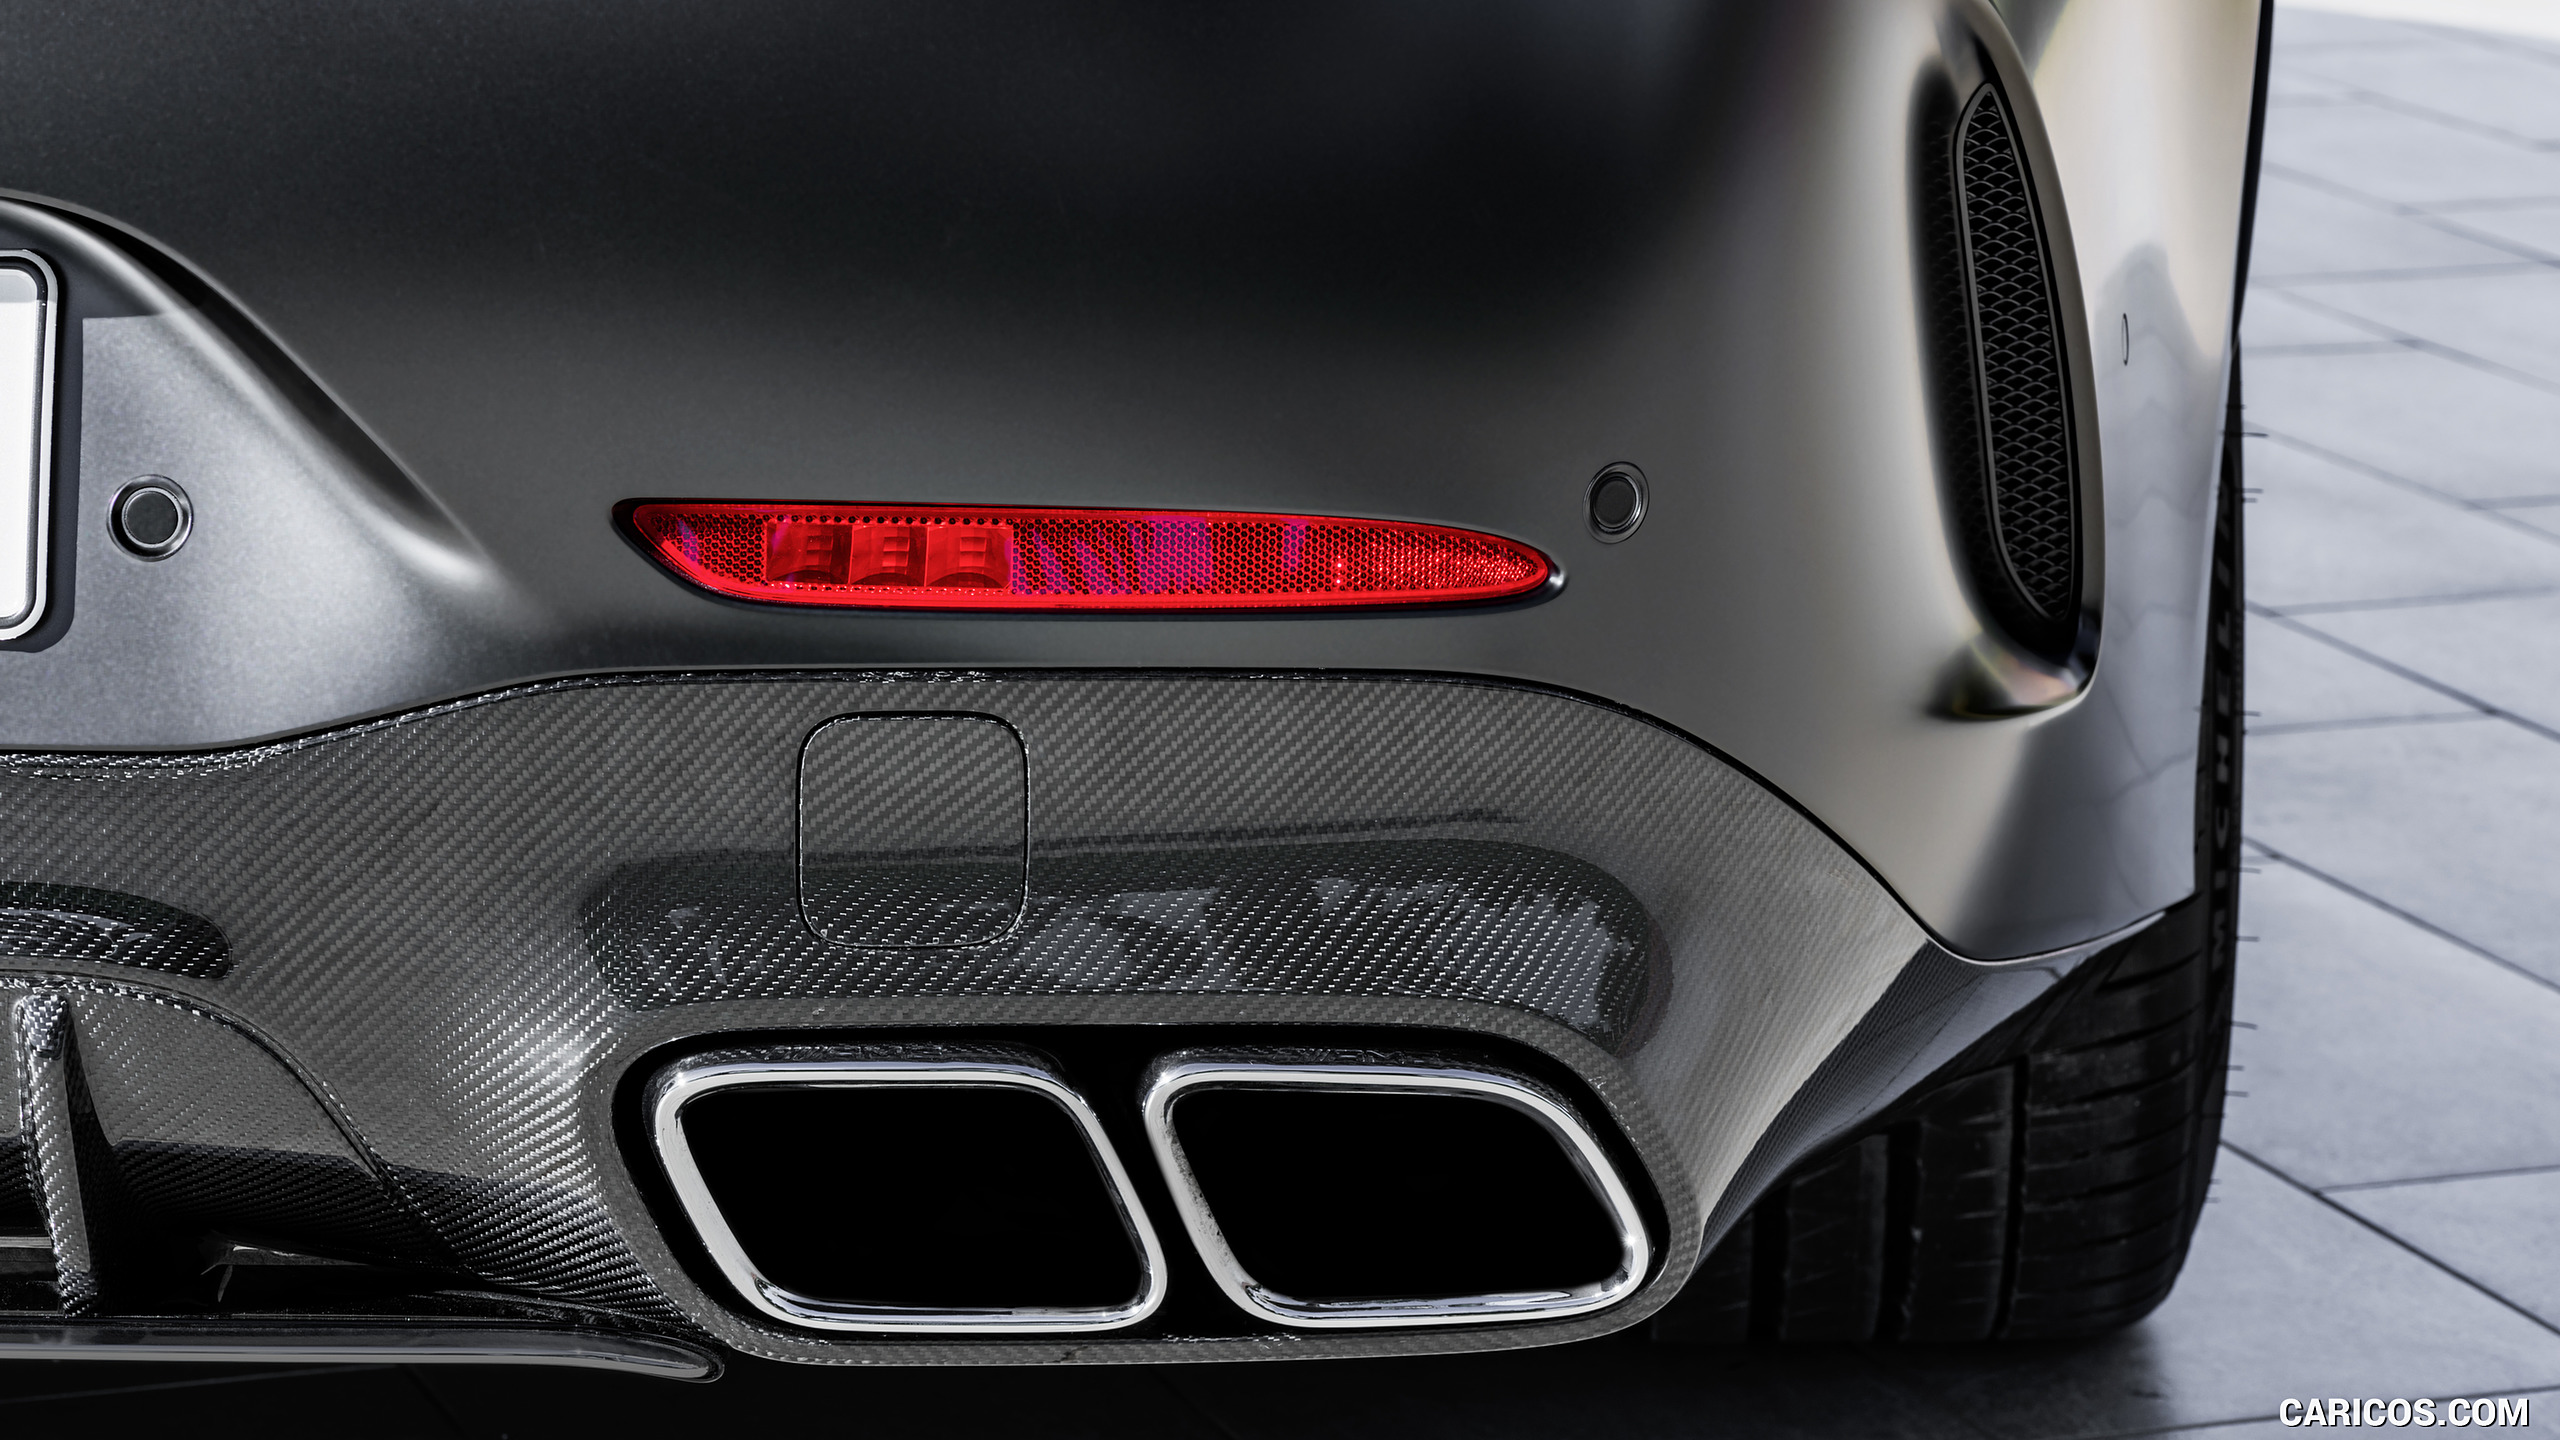 2019 Mercedes-AMG GT 53 4MATIC+ 4-Door Coupe - Tailpipe, #32 of 427